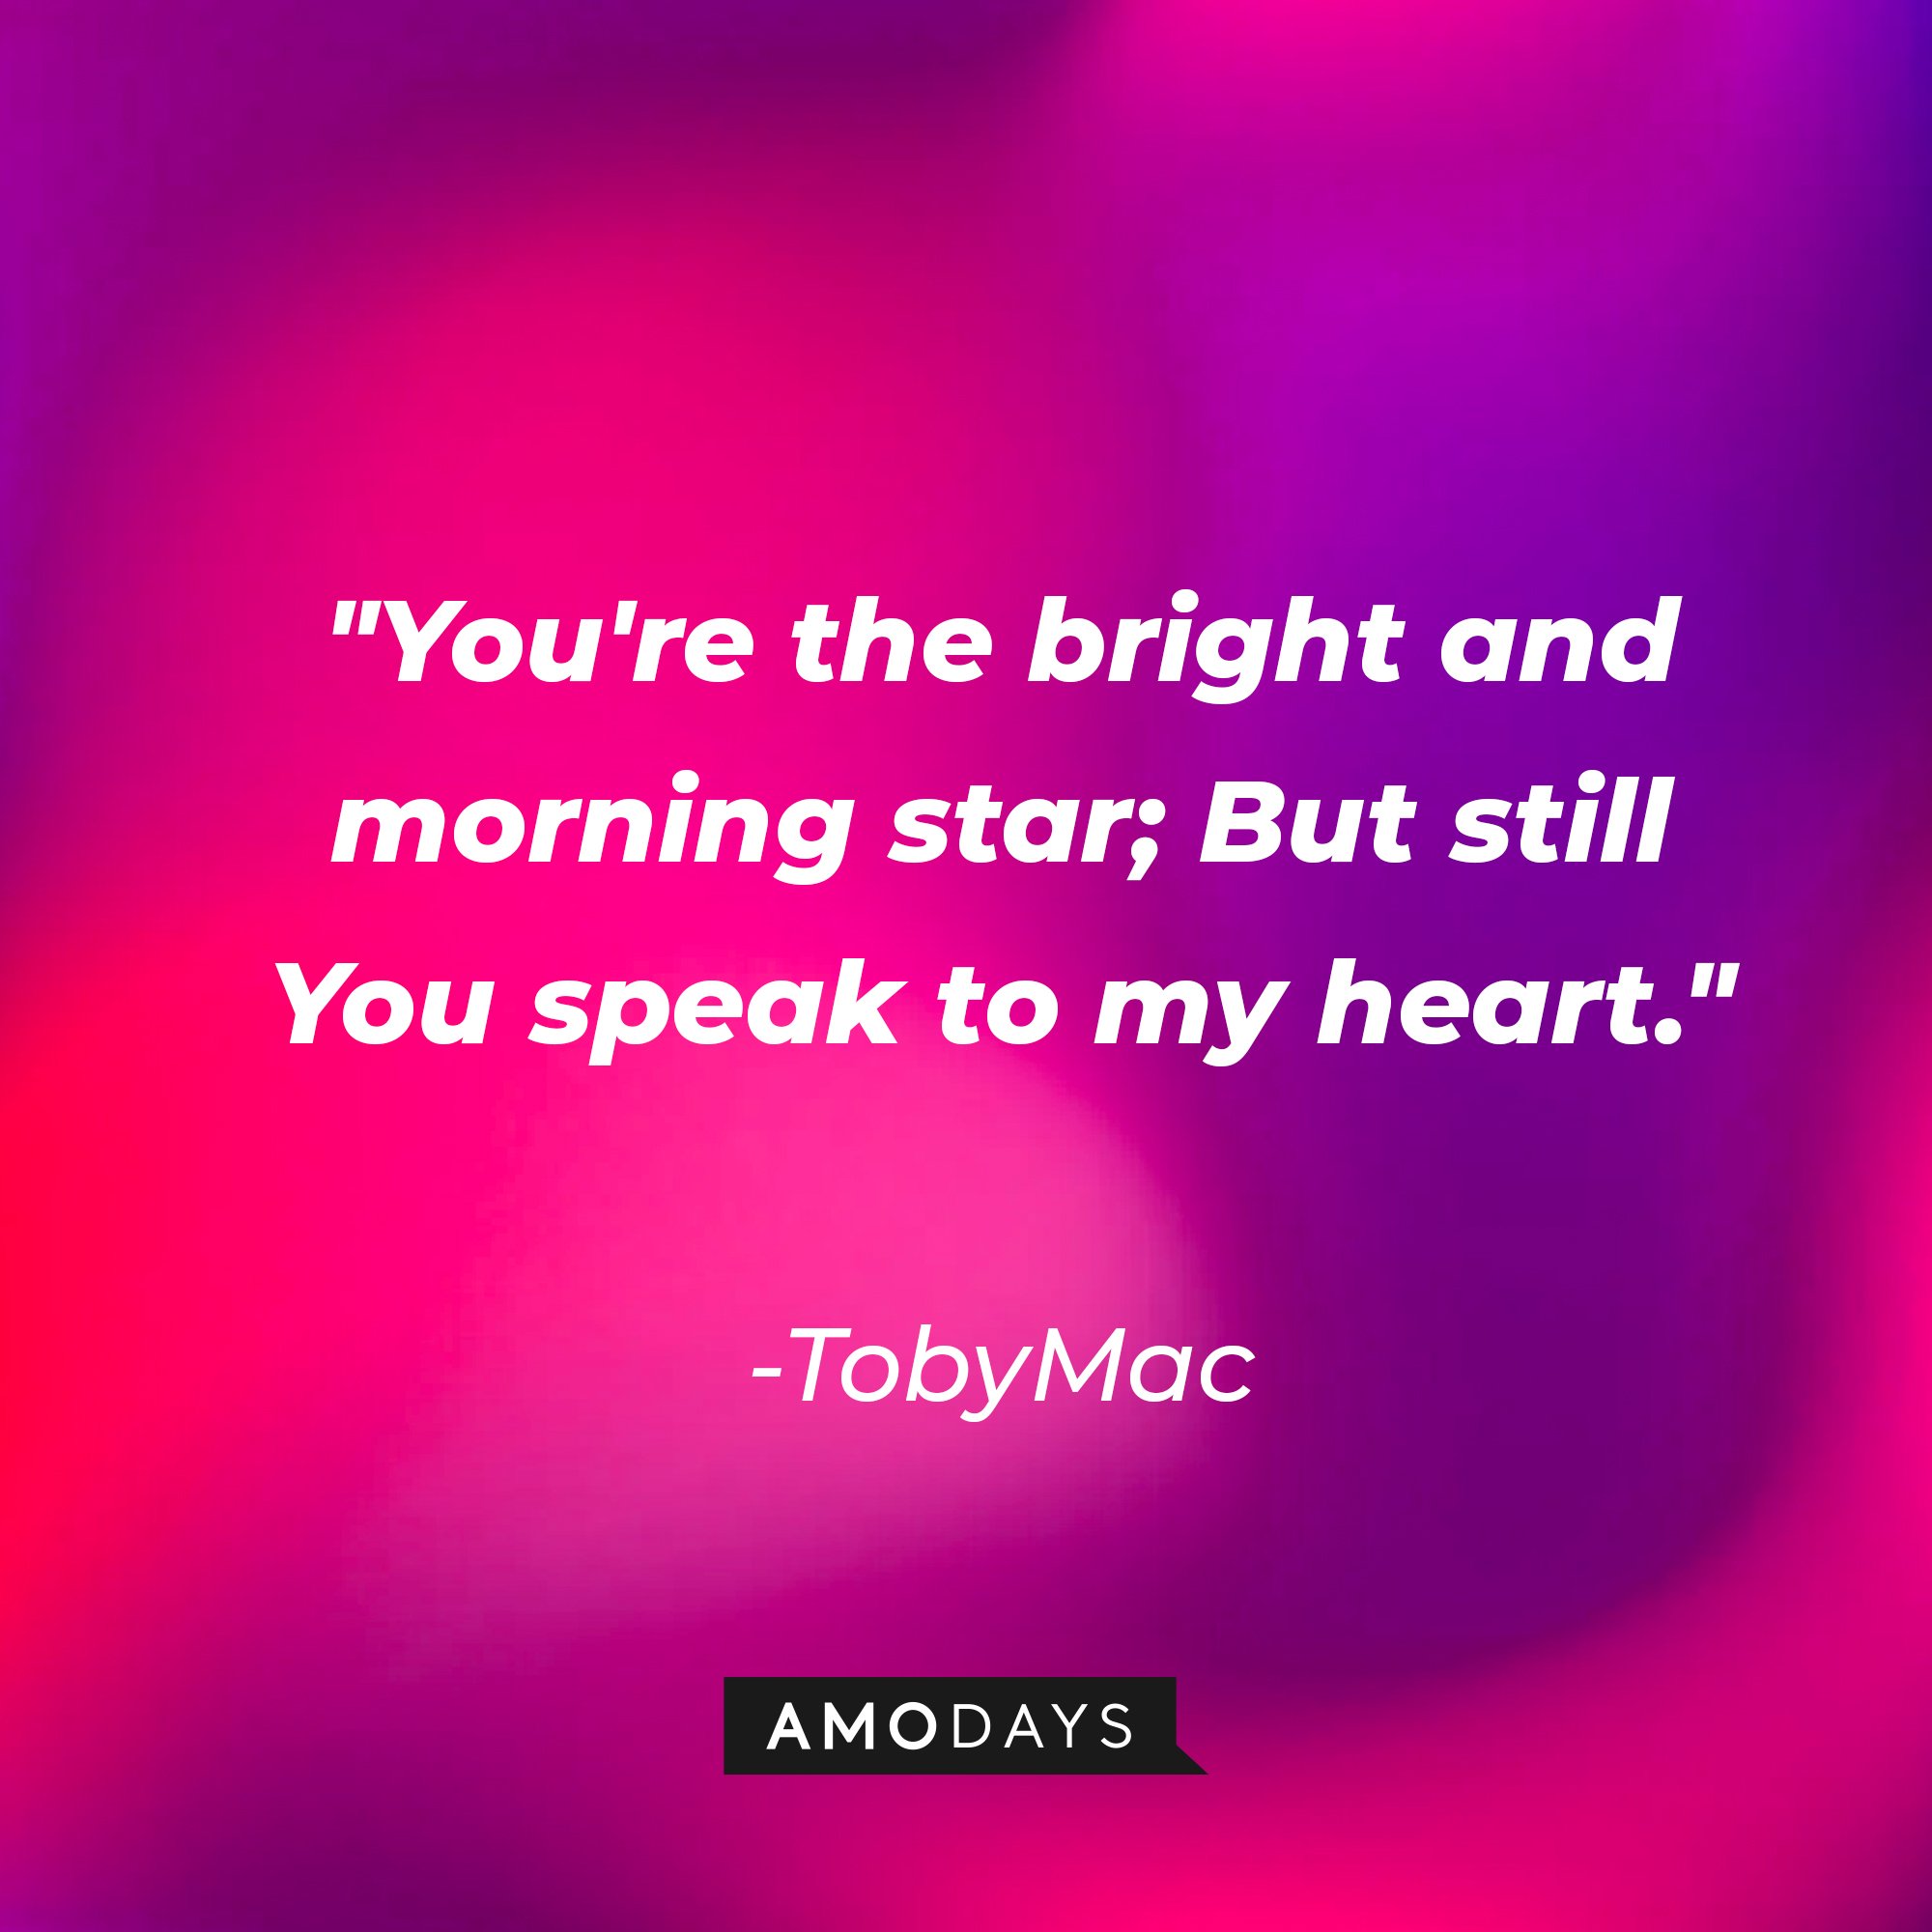 TobyMac's quote: "You're the bright and morning star; But still You speak to my heart." | Image: AmoDays